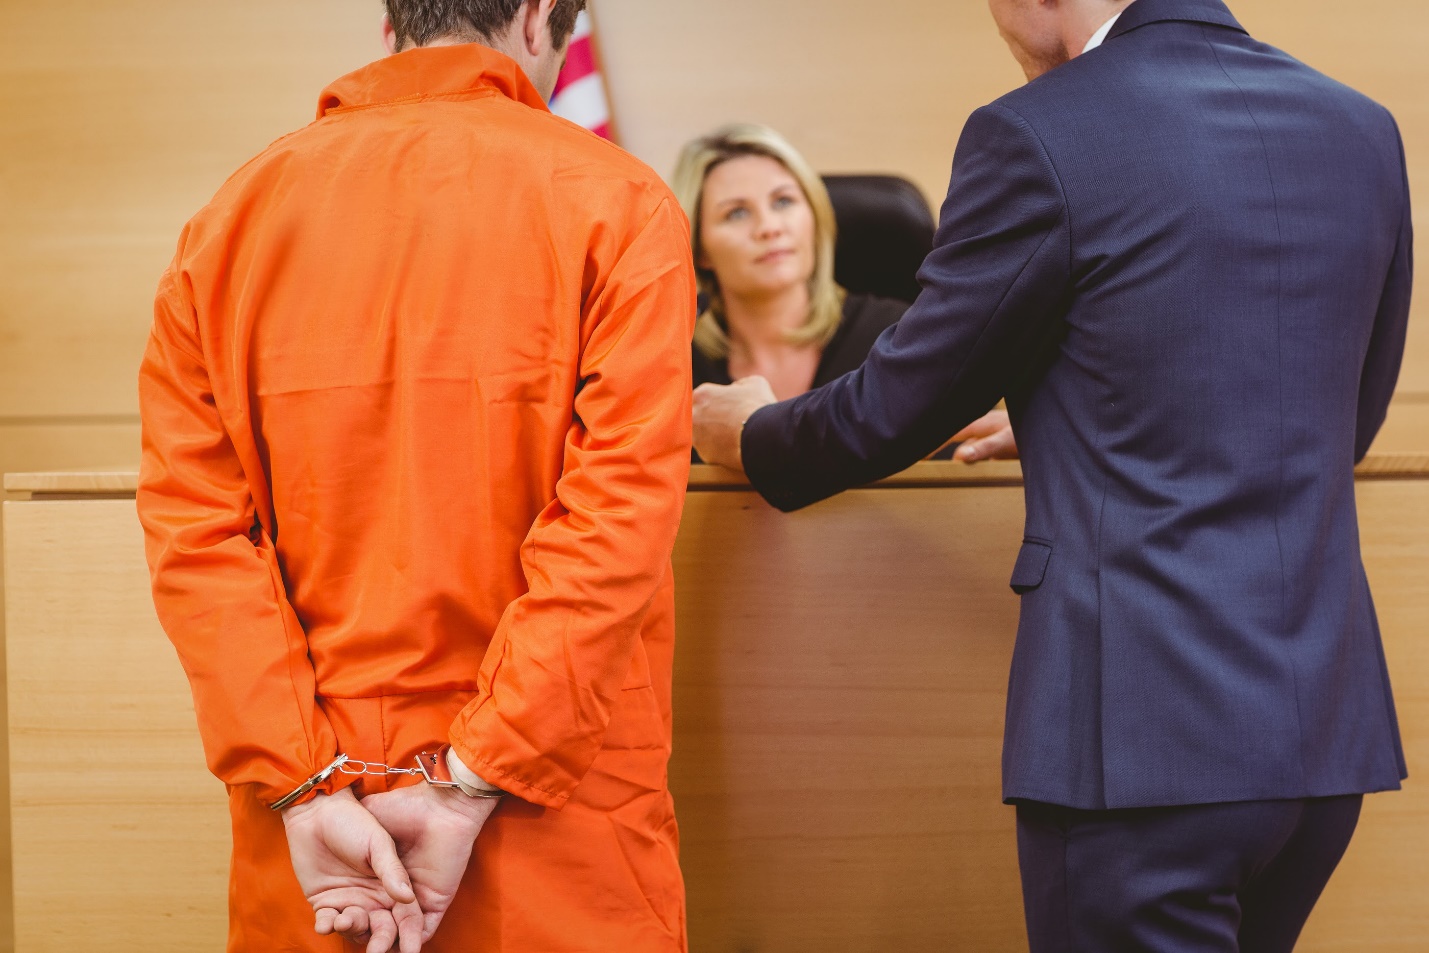 atlantic city criminal defense lawyer - Why Would Charges Get Reduced in New Jersey?